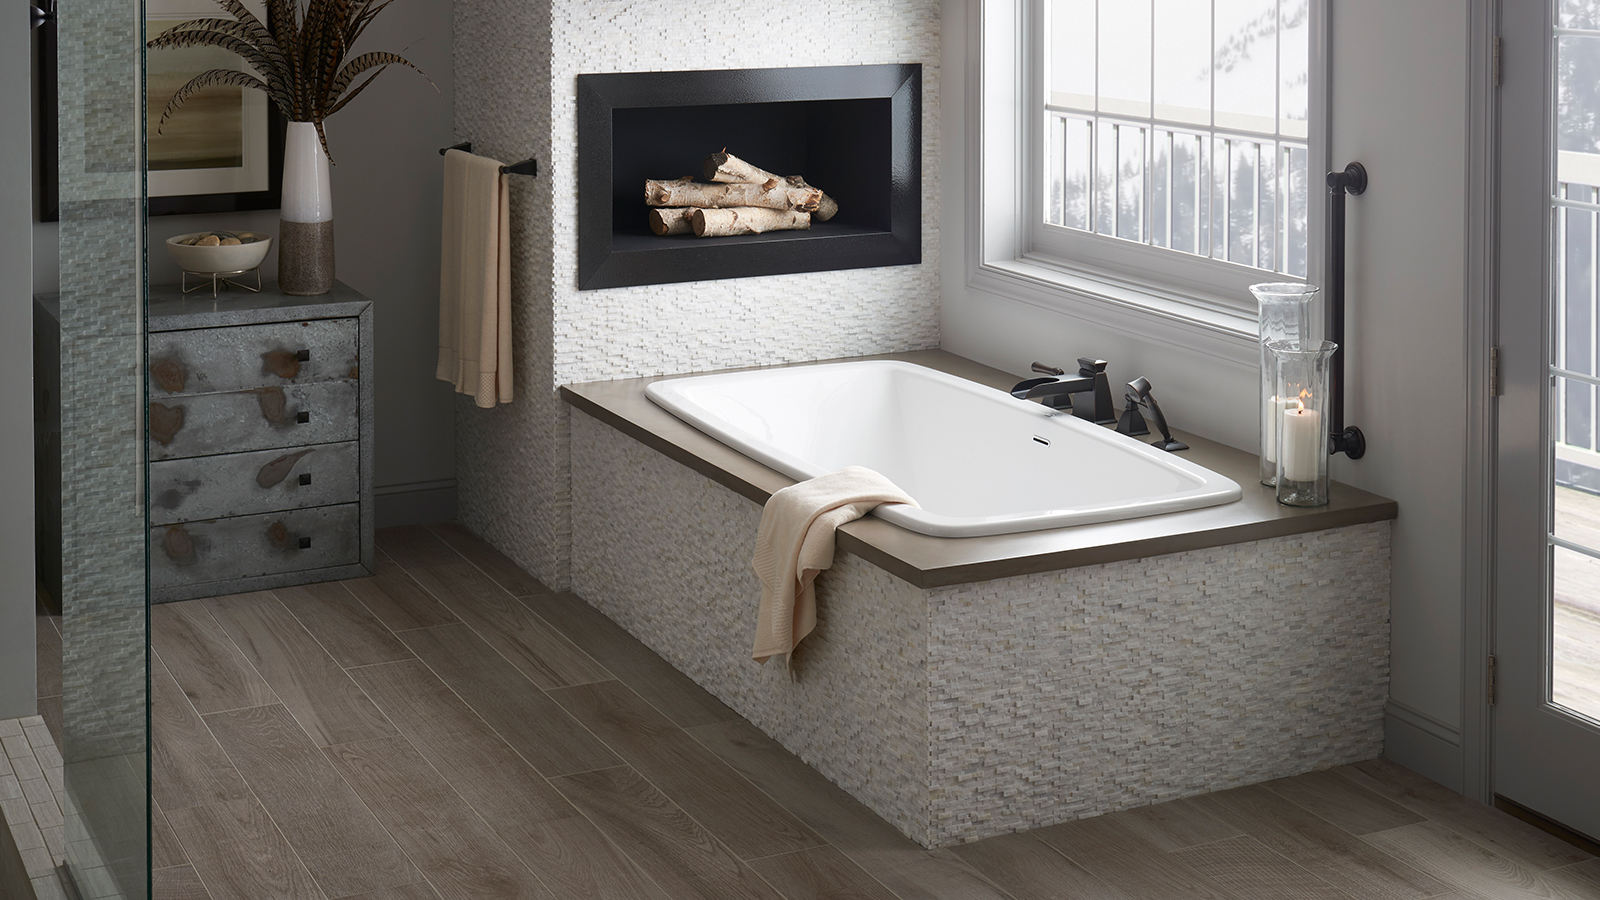 Image of a drop-in tub that has a rock tile skirt around it.